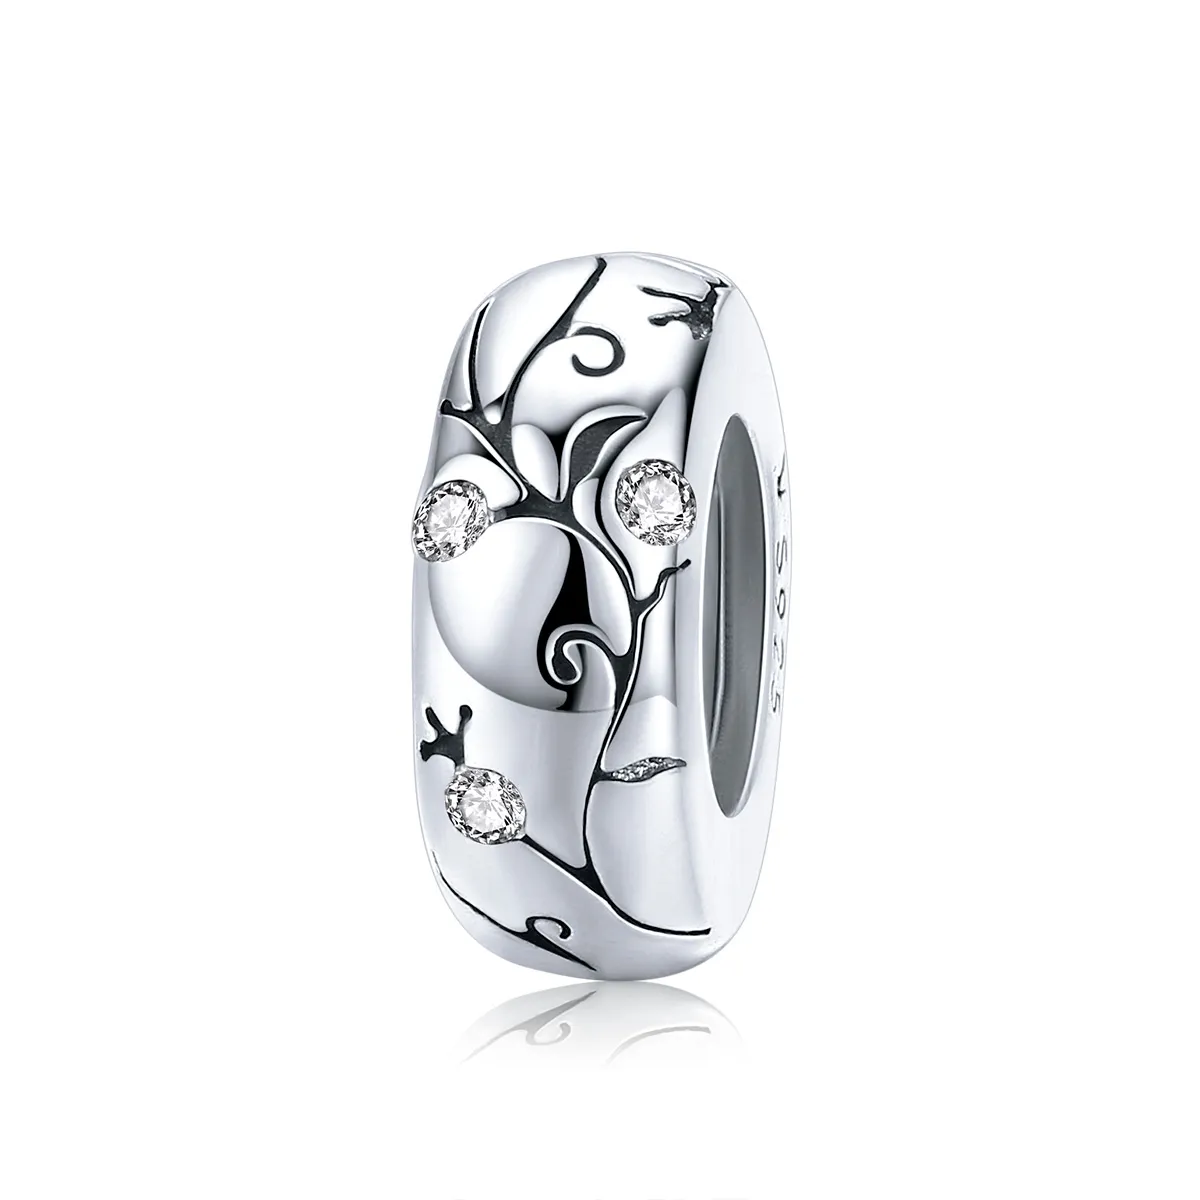 Pandora Style Silver Classical Pattern Spacer Charm - SCC1559